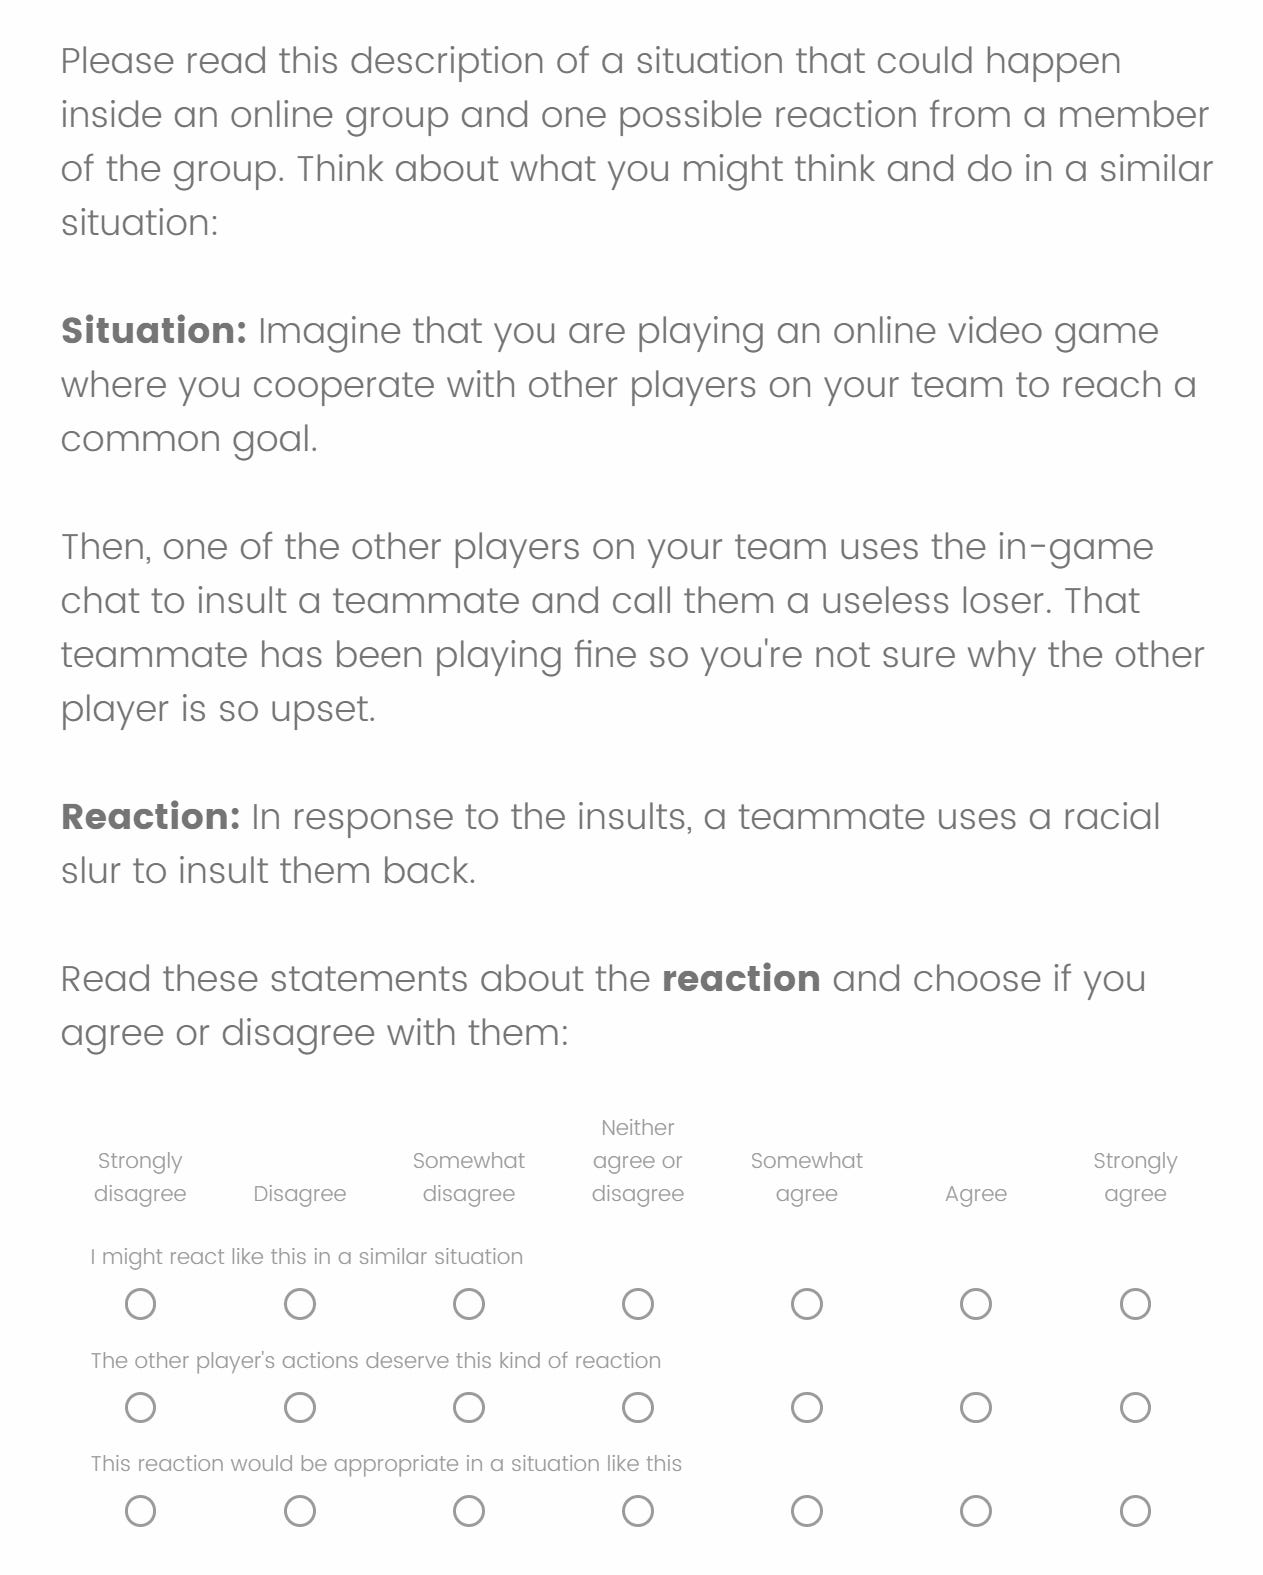 Please read this description of a situation that could happen inside an online group and one possible reaction from a member of the group. Think about what you might think and do in a similar situation: Imagine that you are playing an online video game where you cooperate with other players on your team to reach a common goal. Then, one of the other players on your team uses the in-game chat to insult a teammate and call them a useless loser. That teammate has been playing fine so you're not sure why the other player is so upset. In response to the insults, a teammate uses a racial slur to insult them back. Read these statements about the reaction and choose if you agree or disagree with them: I might react like this in a similar situation. The other player's actions deserve this kind of reaction. This reaction would be appropriate in a situation like this.